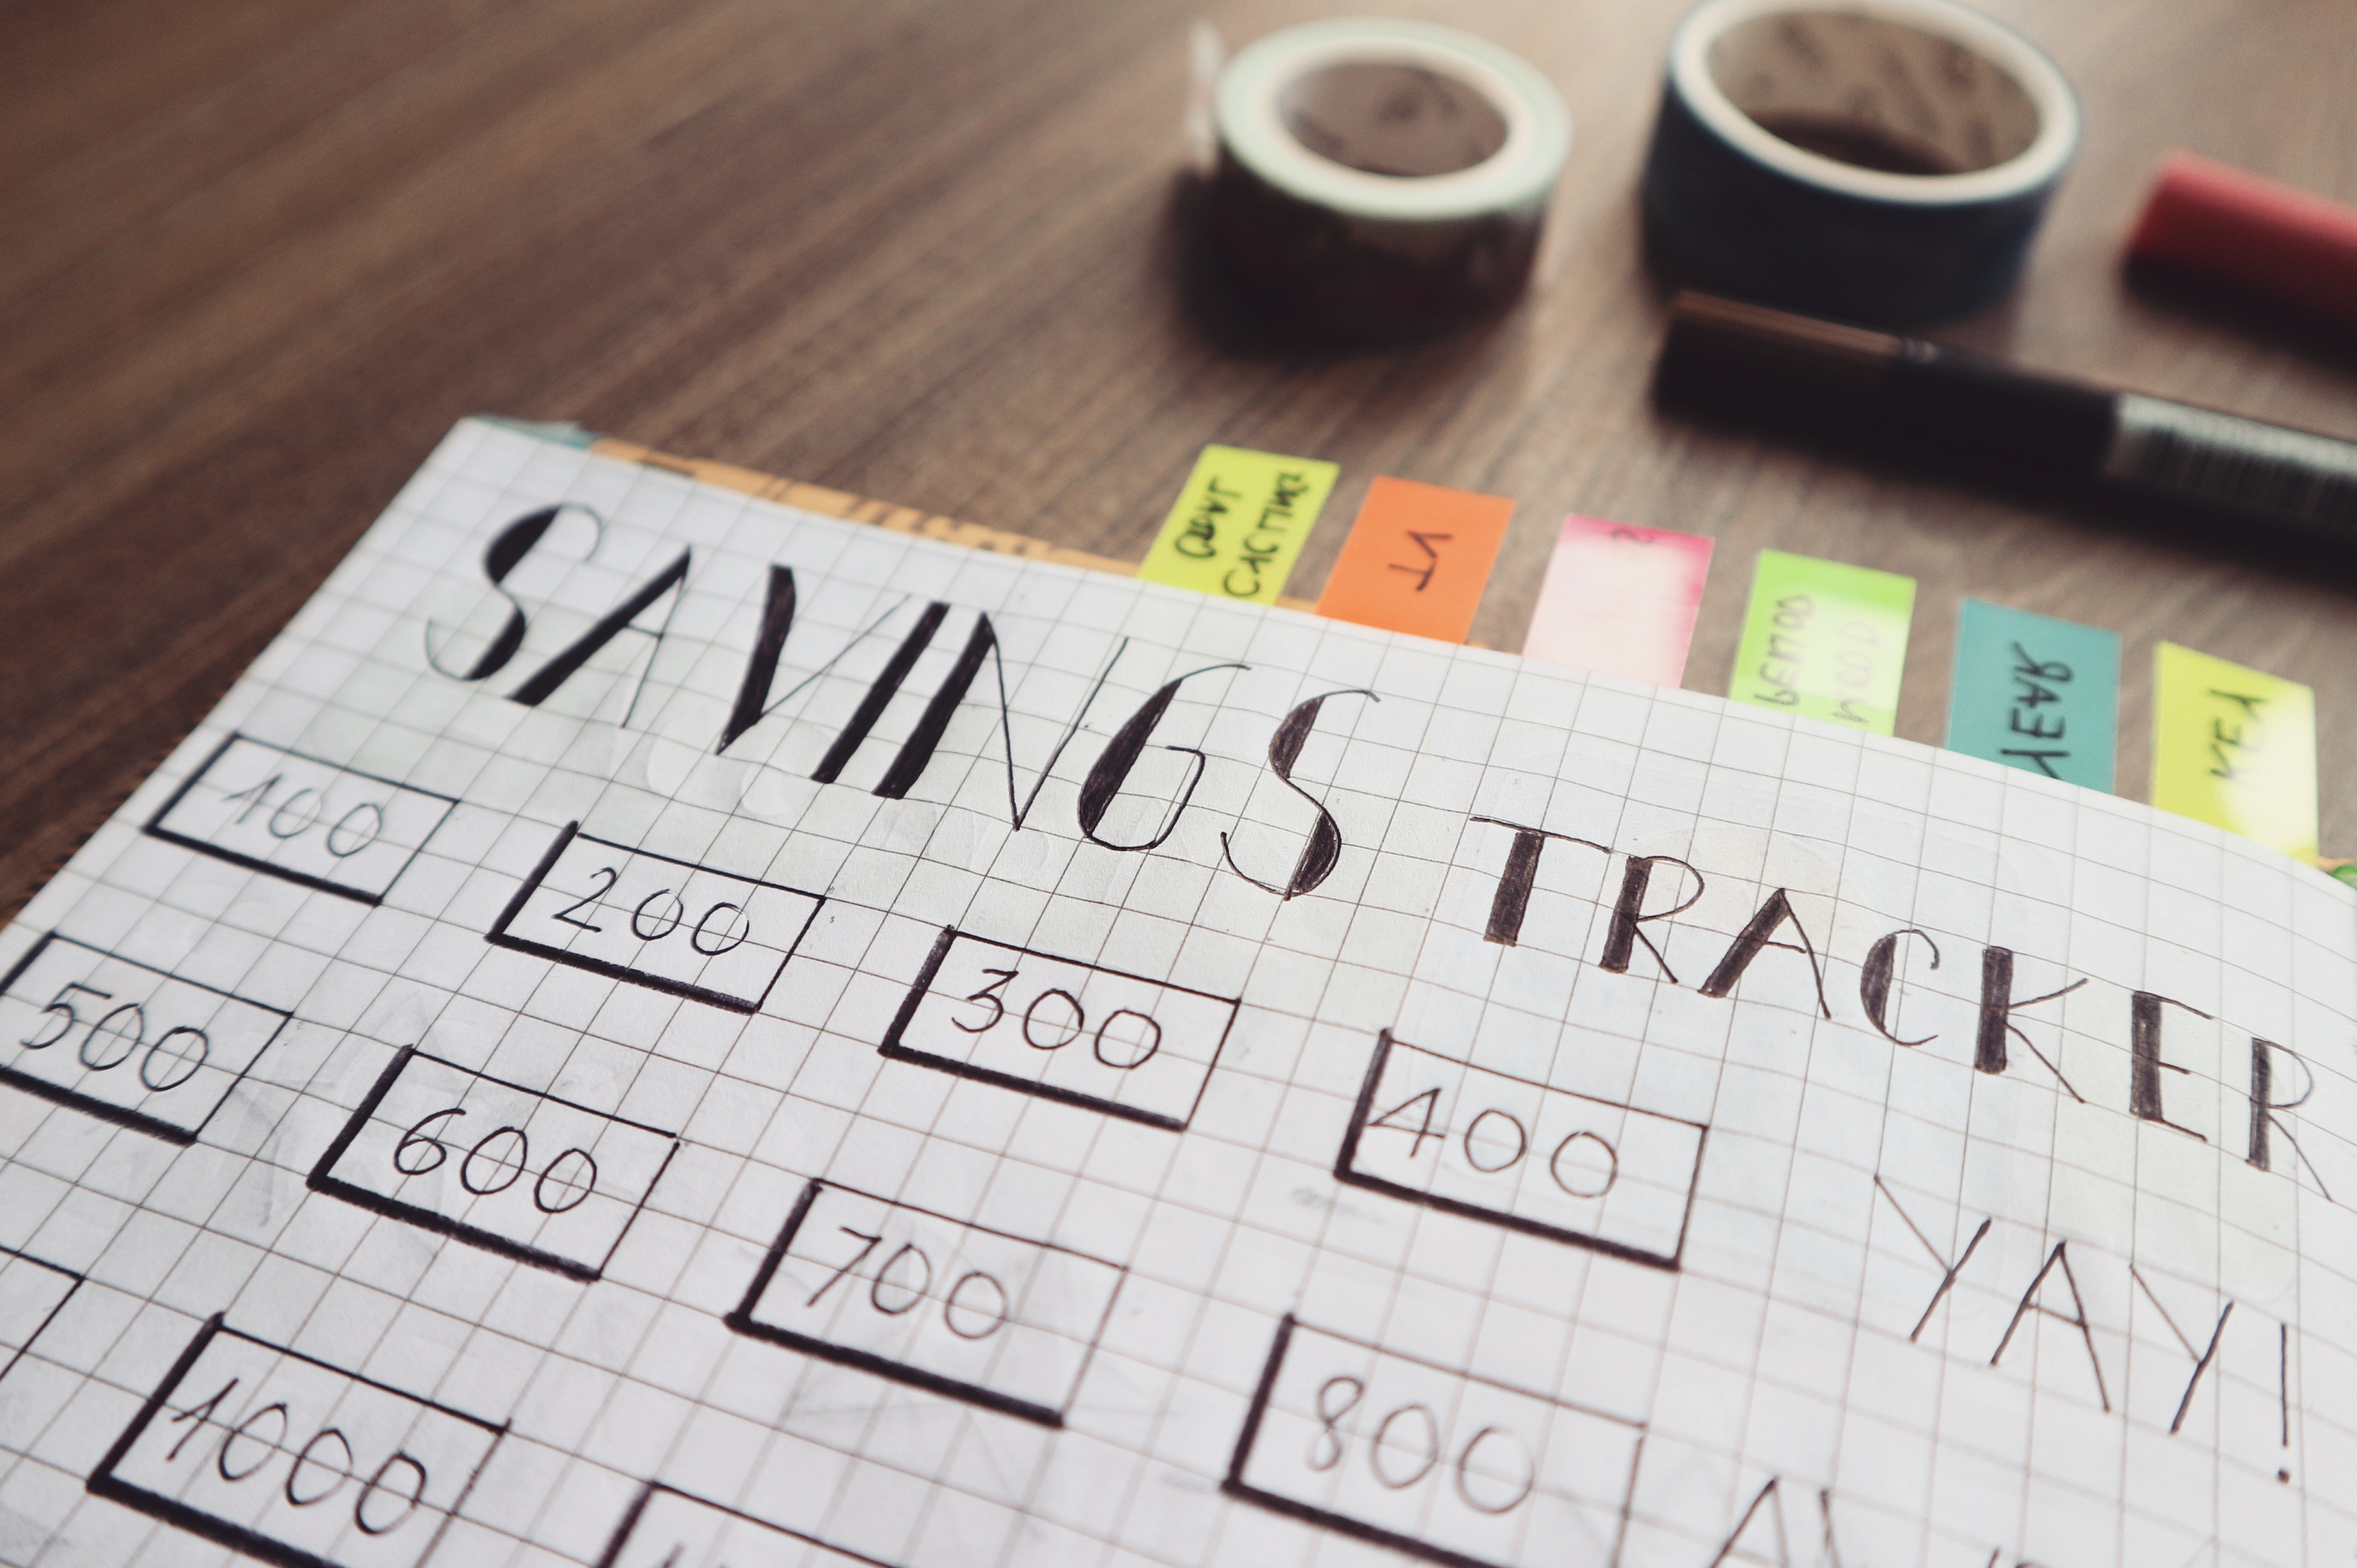 A savings tracker board tracking how much you plan to save.